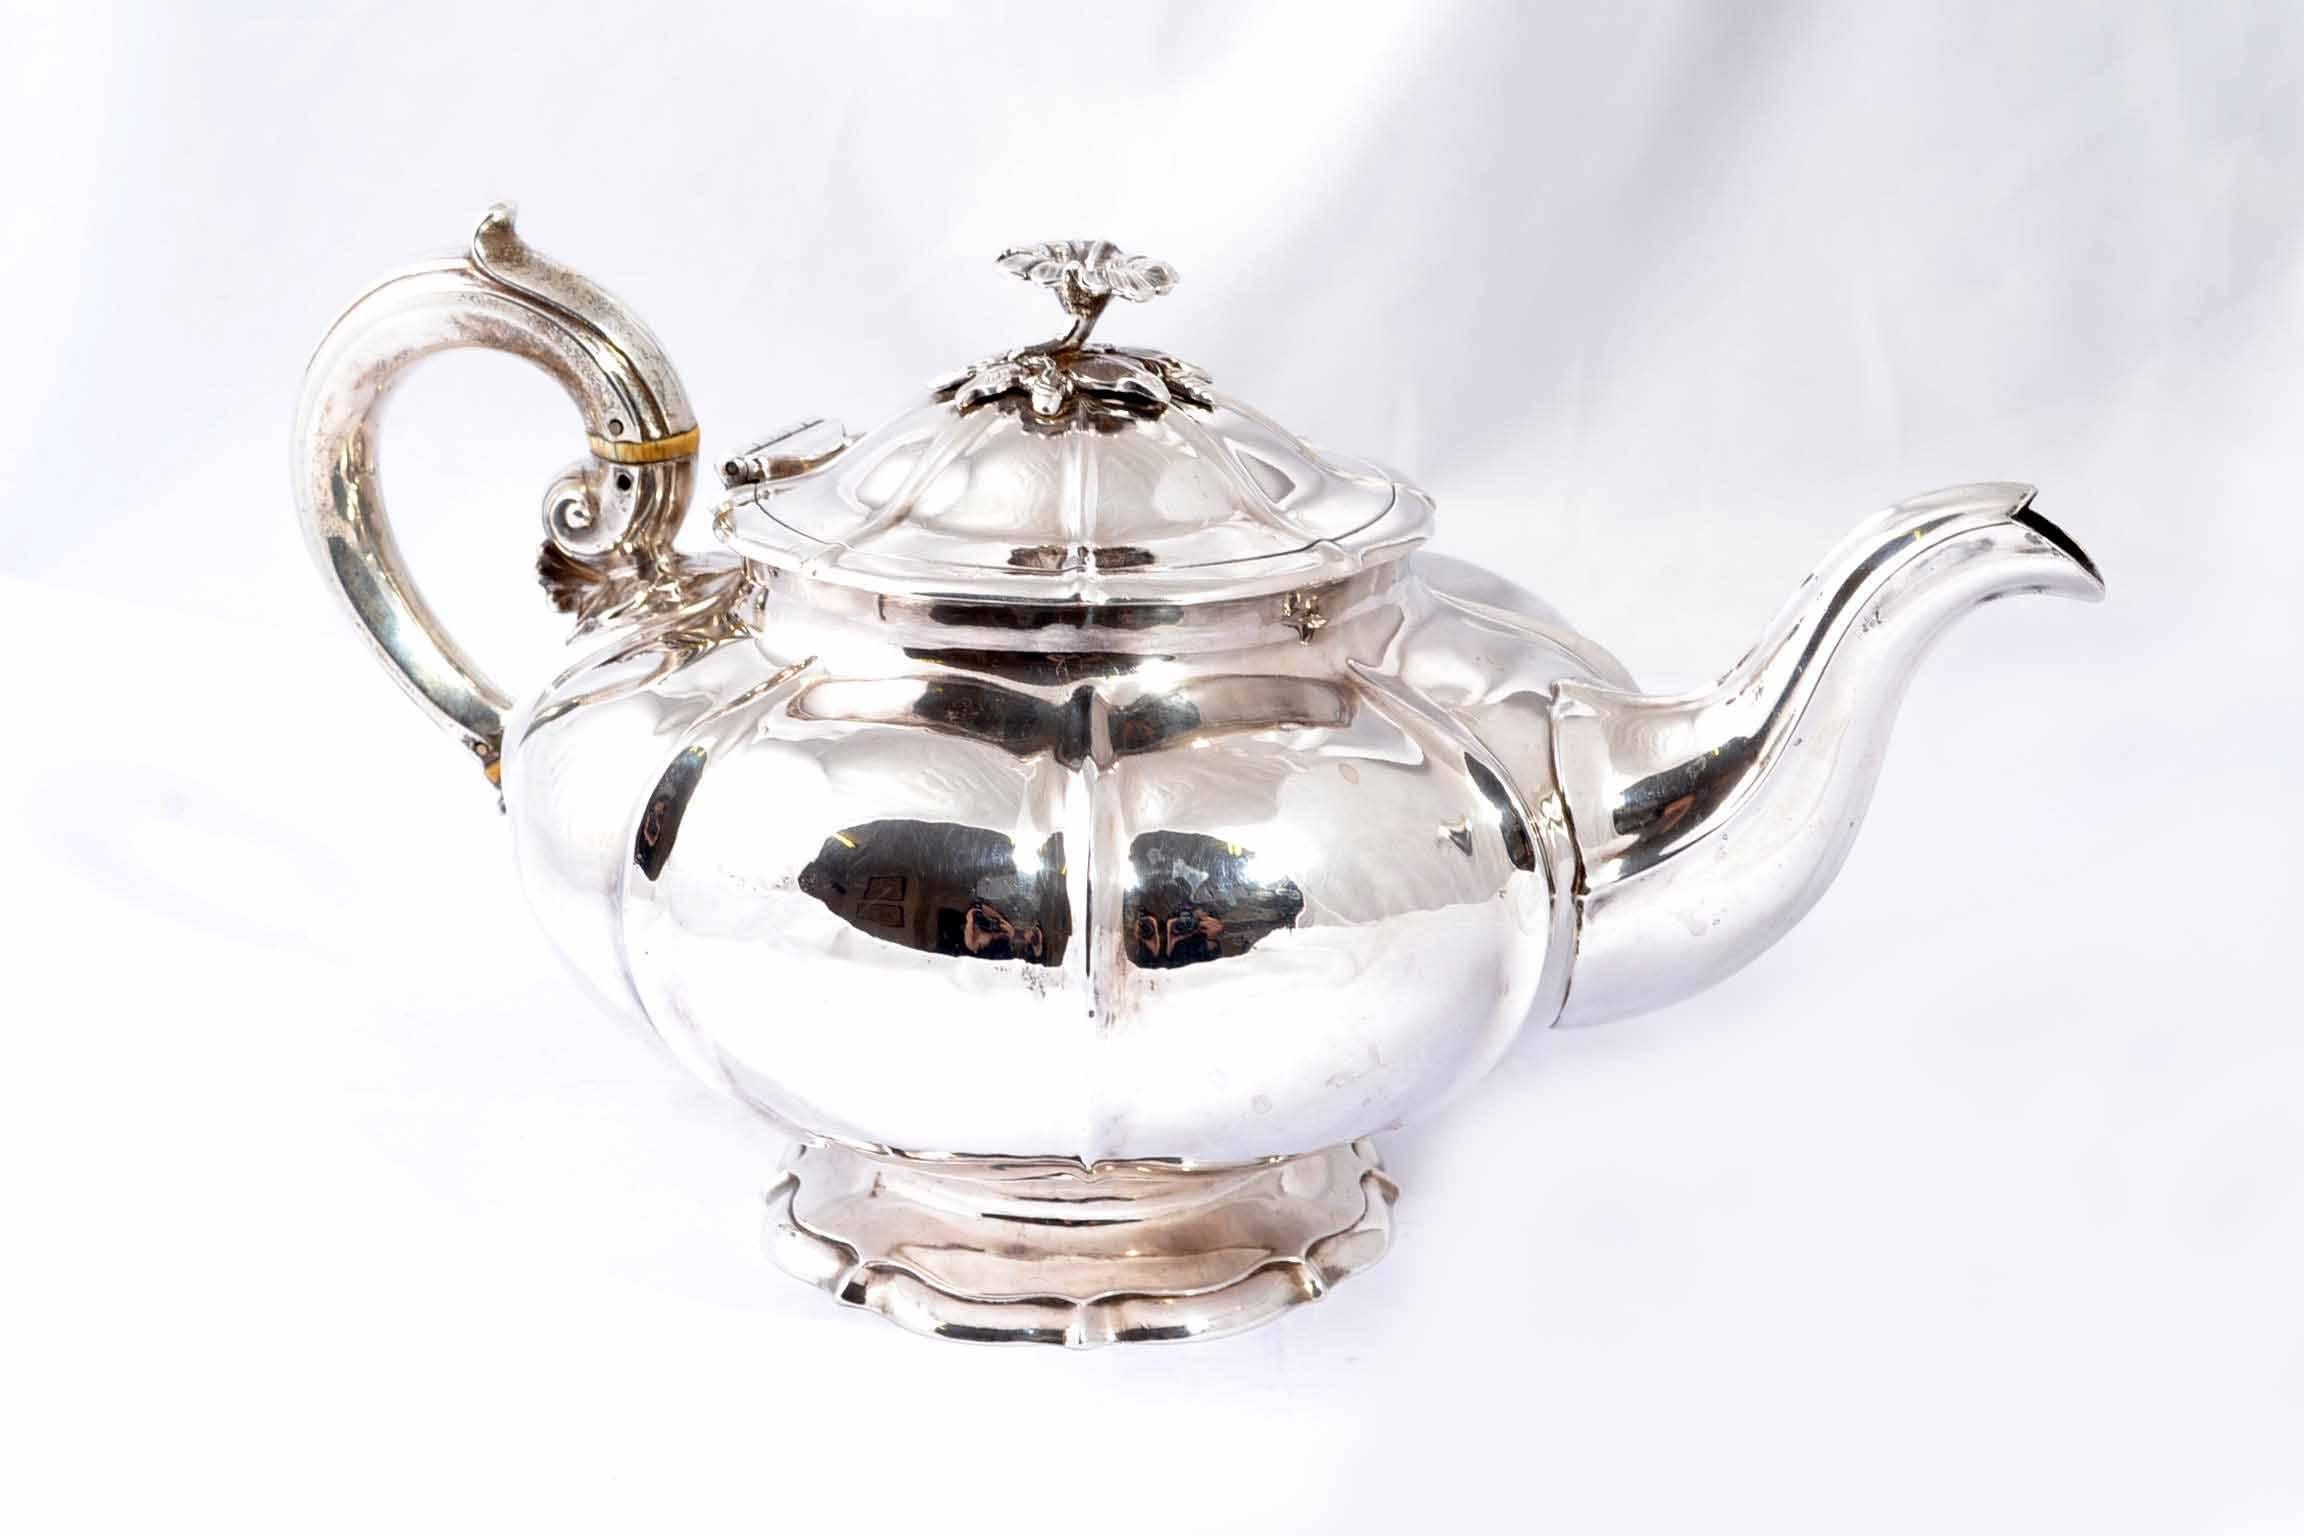 A wonderful sterling silver antique teapot with hallmarks for London 1832 and the makers mark of Charles Gordon. It is beautifully made and there is no mistaking its unique quality and elegant design, which is sure to make it a treasured piece by